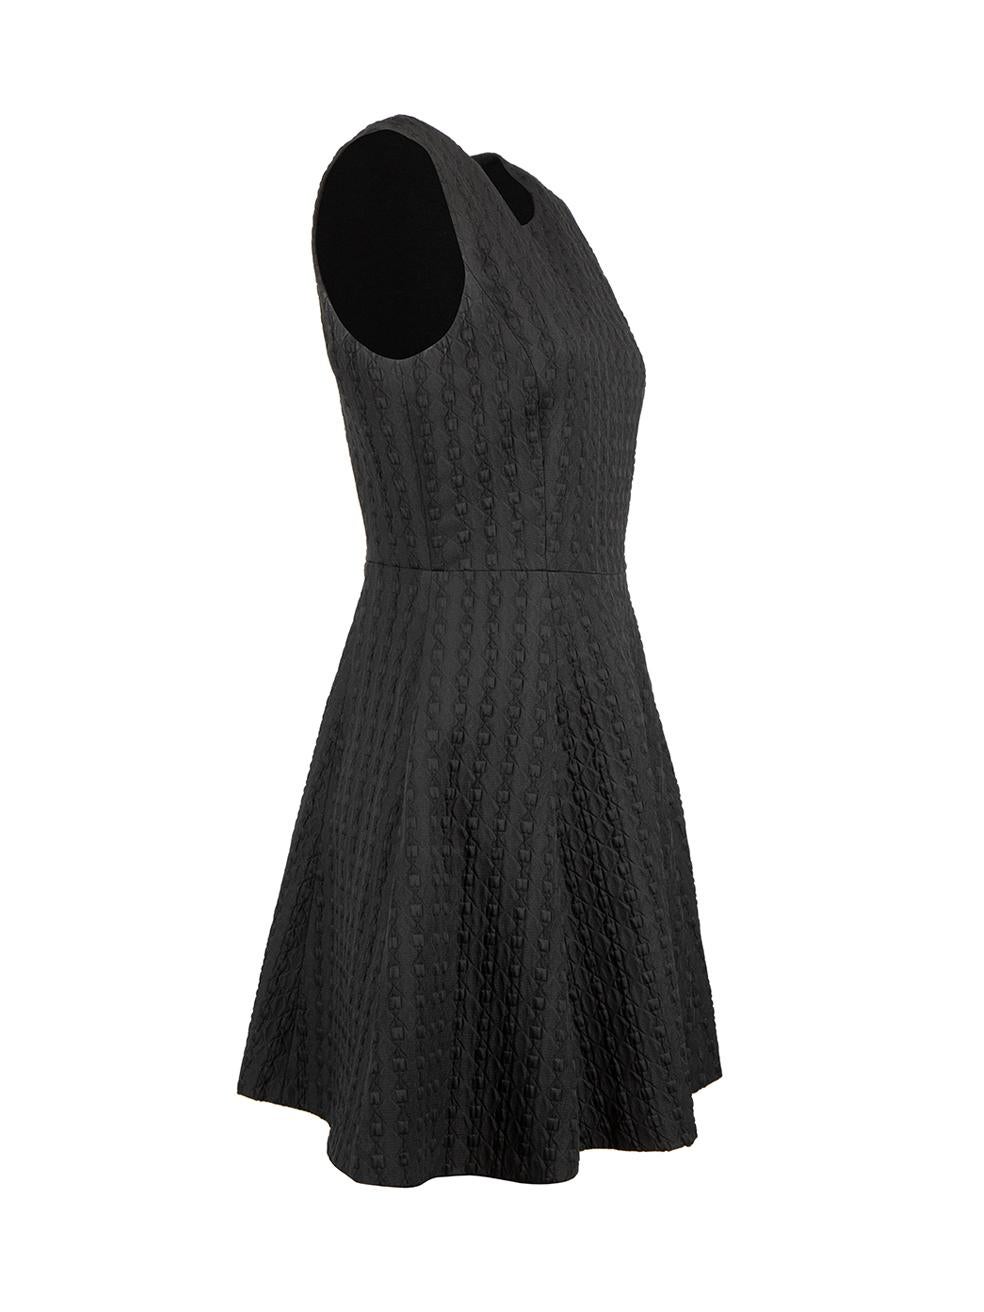 CONDITION is Good. Small white marks along underarms and slight staining along front of dress. General wear to this used Theory designer resale item.
 
 
 
 Details
 
 
 Black
 
 Polyester
 
 Mini dress
 
 Sleeveless
 
 Back zip fastening
 
 Round